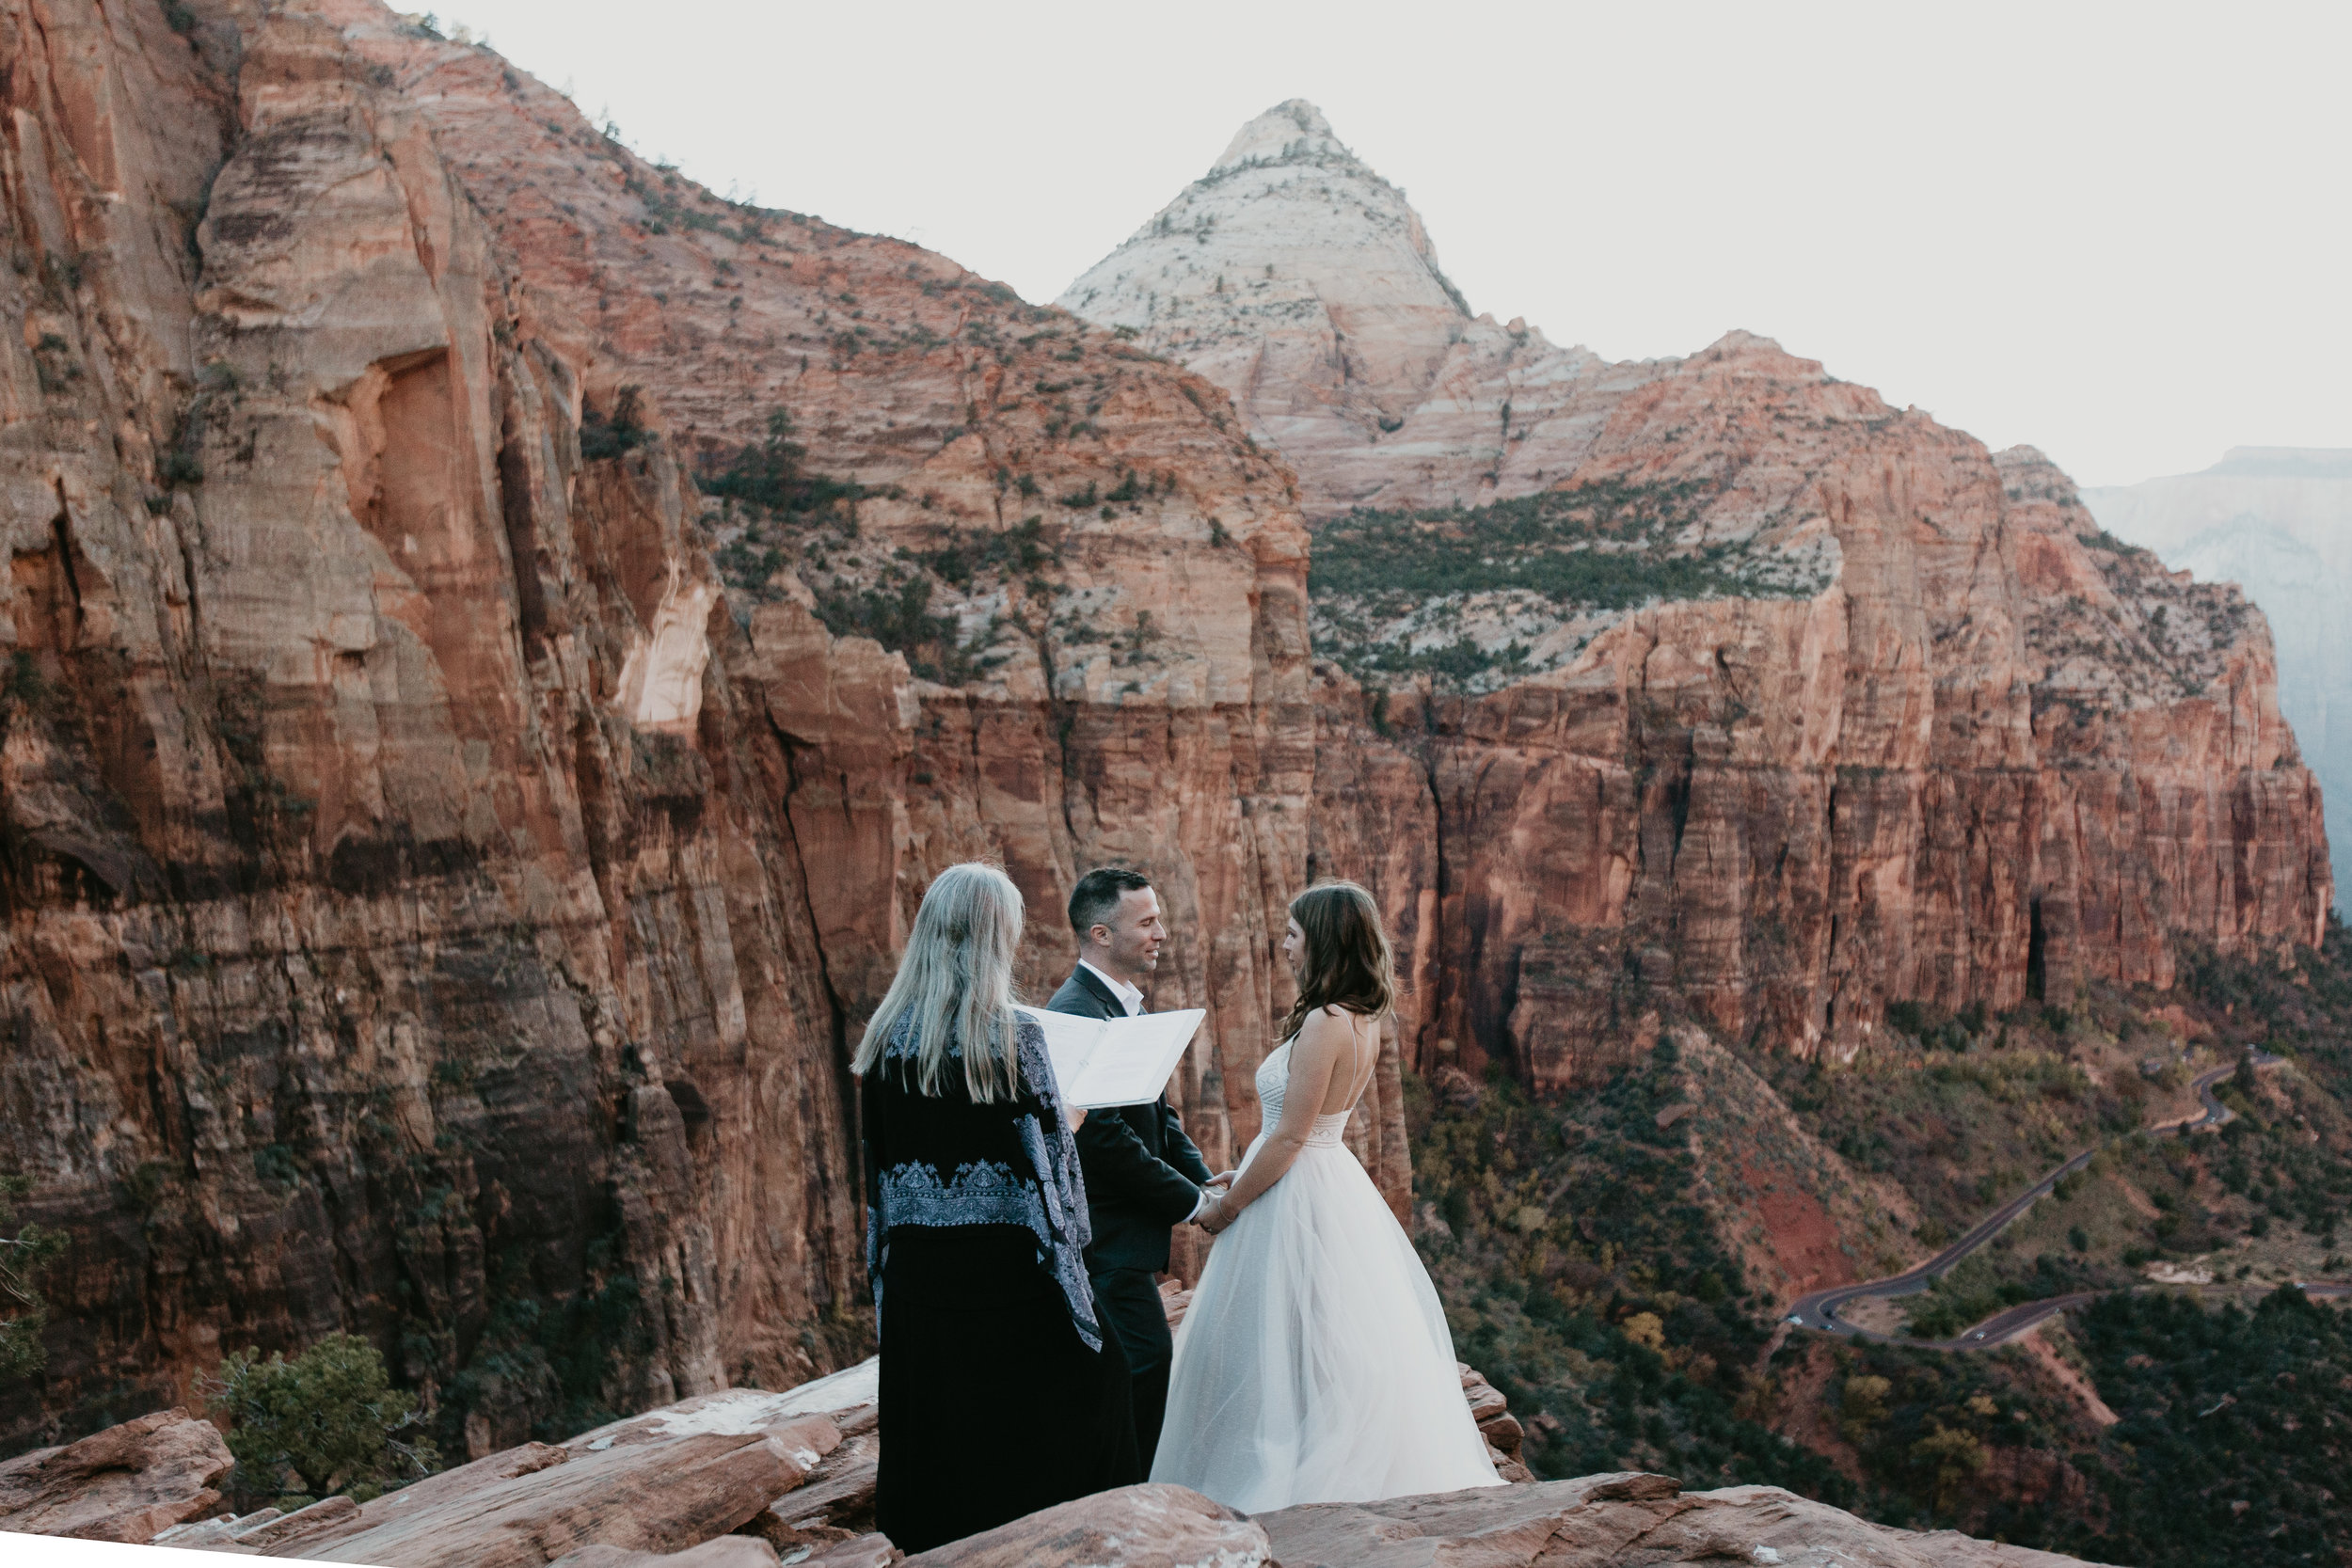 nicole-daacke-photography-zion-national-park-elopement-photographer-canyon-overlook-trail-elope-hiking-adventure-wedding-photos-fall-utah-red-rock-canyon-stgeorge-eloping-photographer-47.jpg